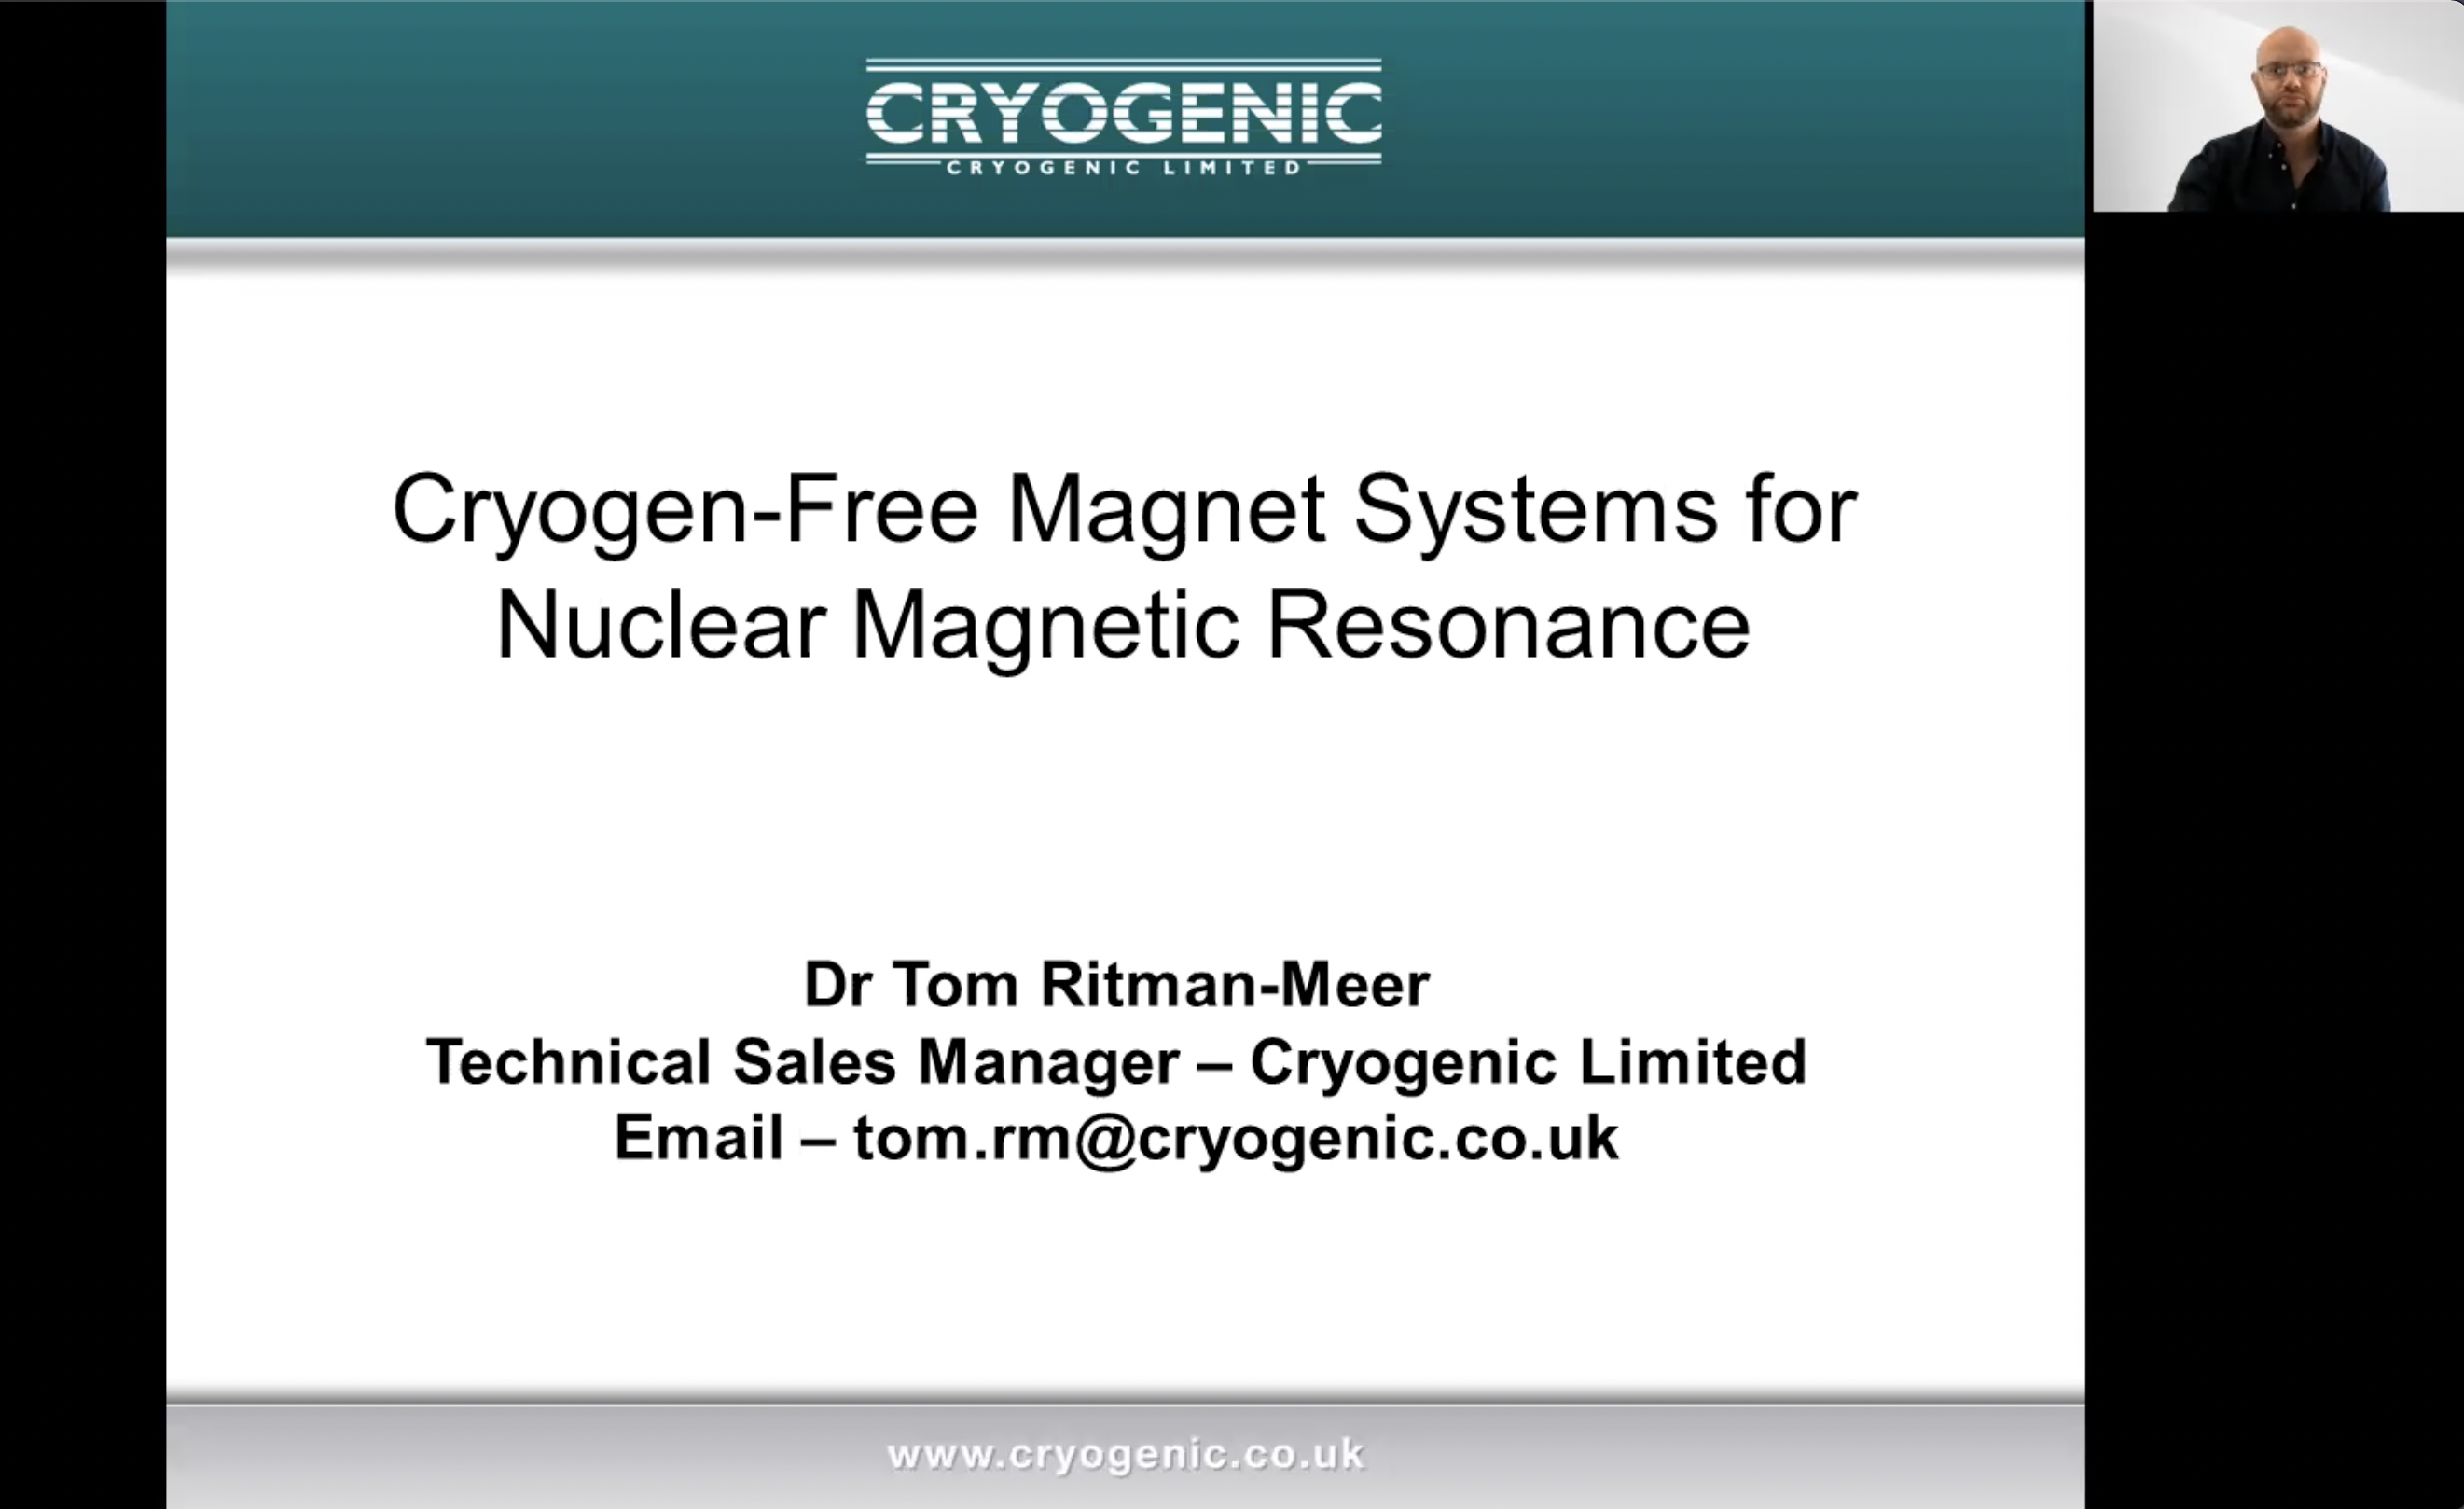 Cryogen-Free Magnet Systems for Nuclear Magnetic Resonance